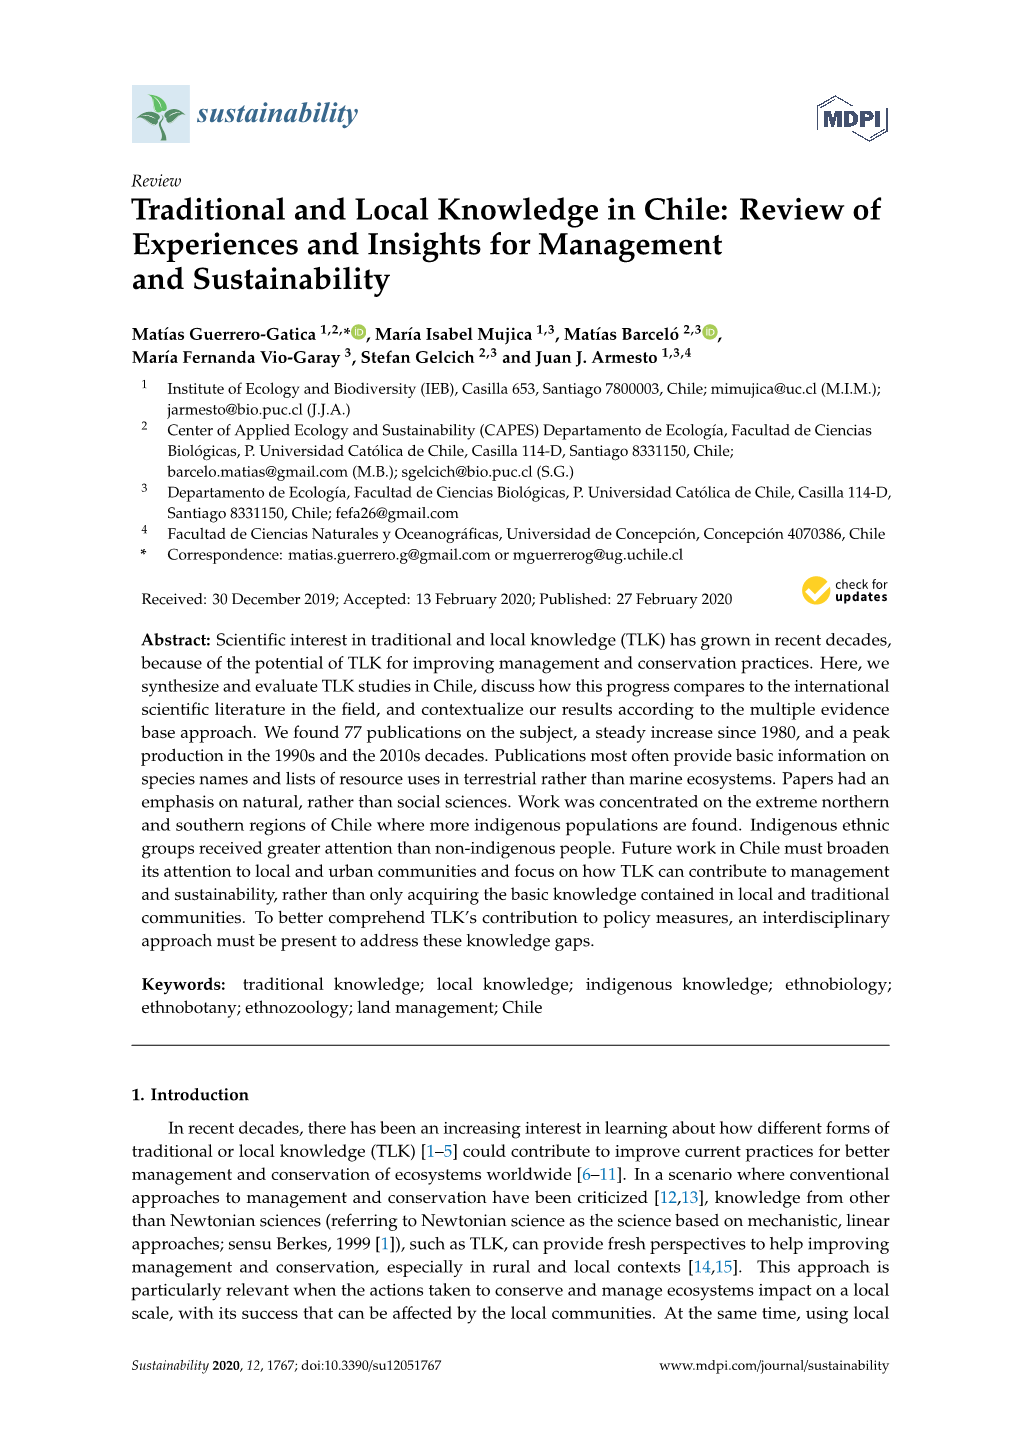 Traditional and Local Knowledge in Chile: Review of Experiences and Insights for Management and Sustainability